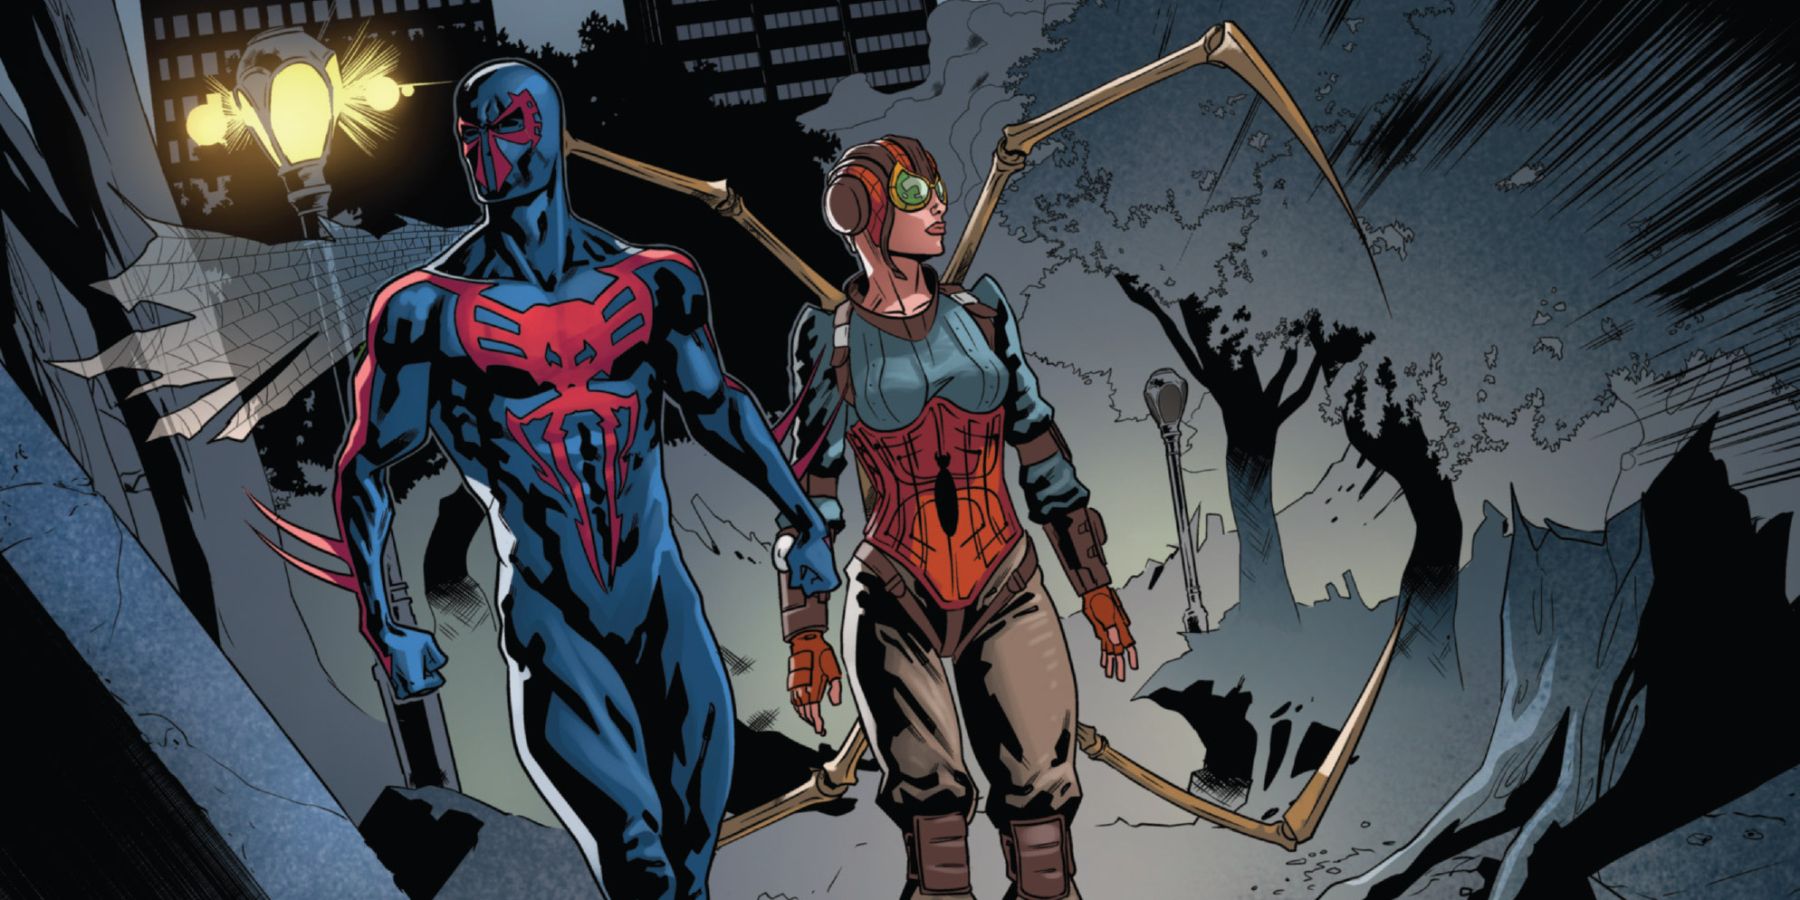 Spider-Man 2099 and Lady Spider arriving on another Earth in Spider-Man 2099 Spider-Verse